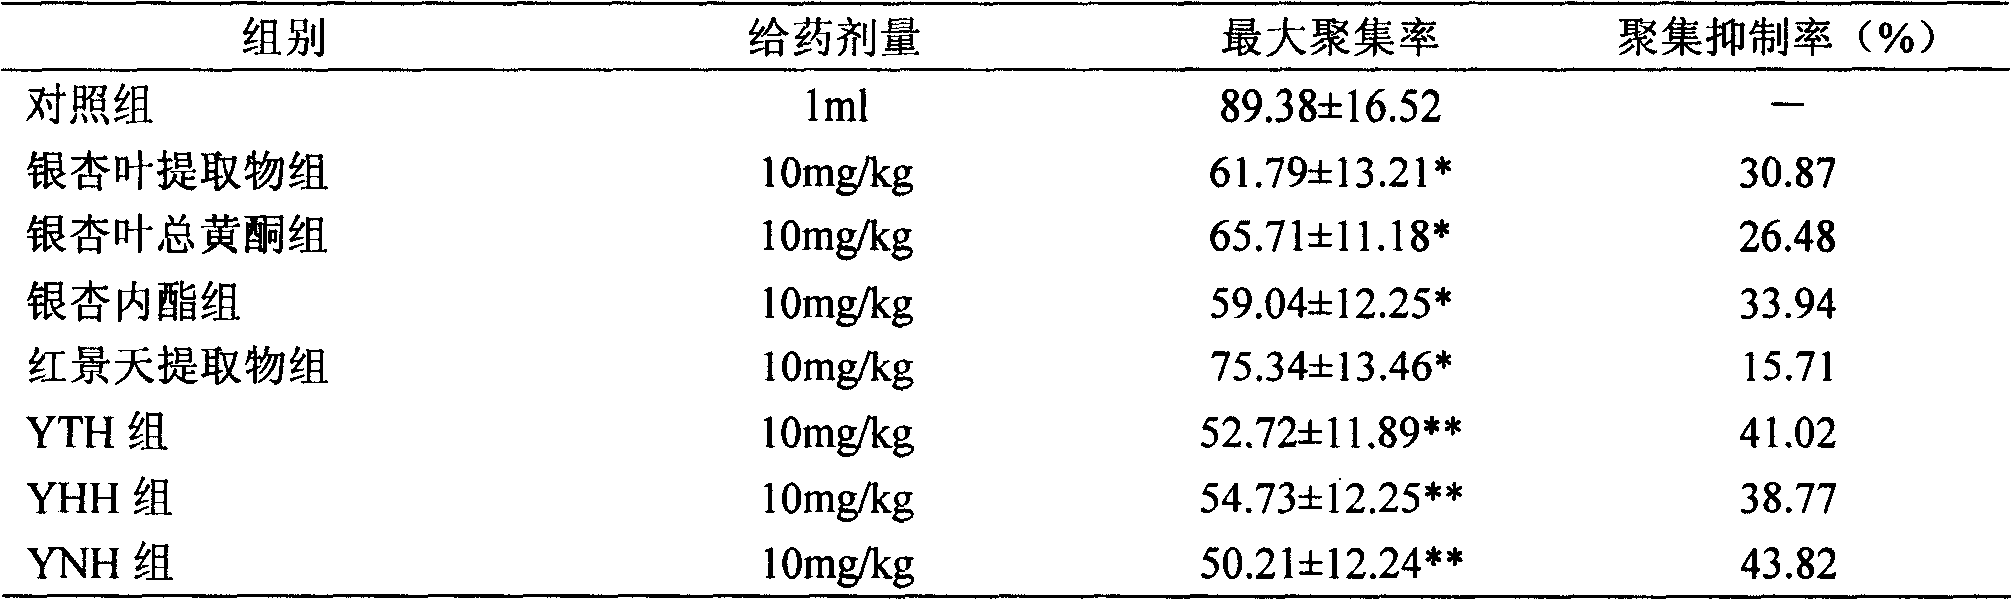 Medicine composition of gingko leaf and rhodiola root